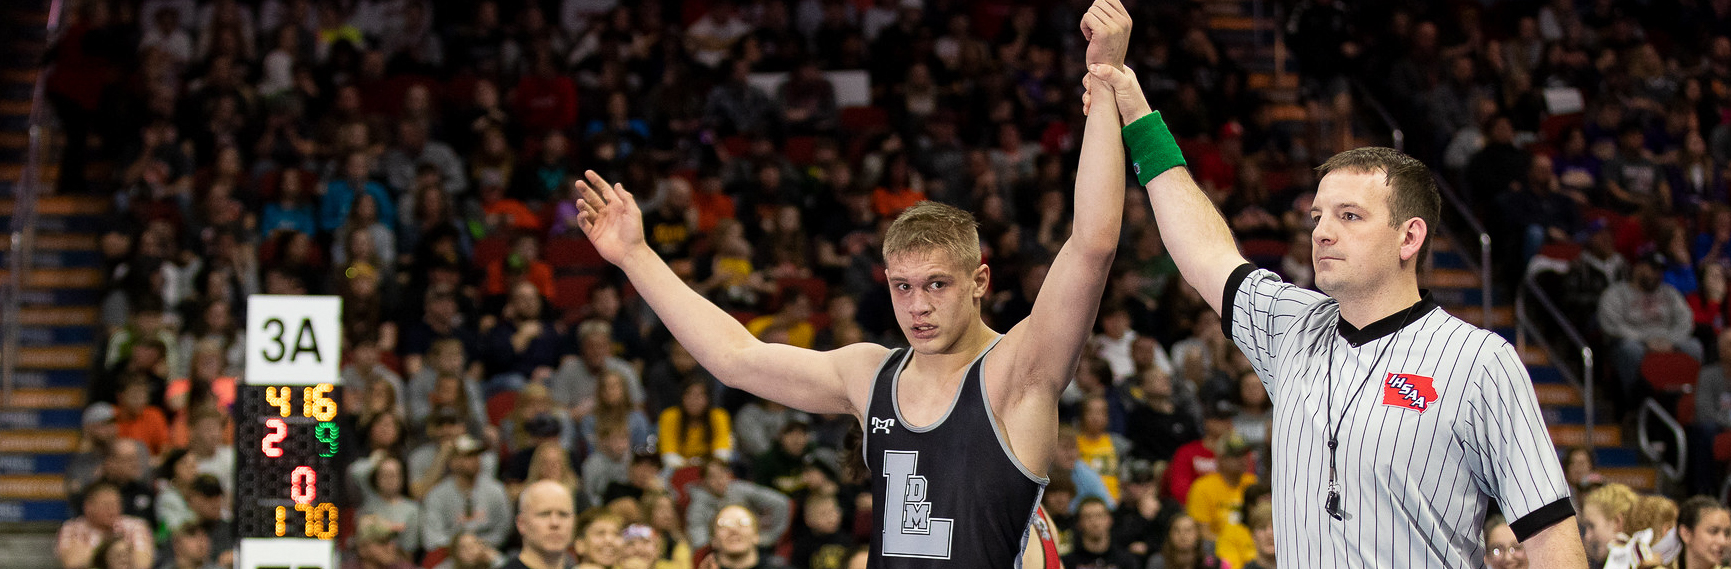 Lincoln’s Mickey Griffith Wins State Wrestling Title